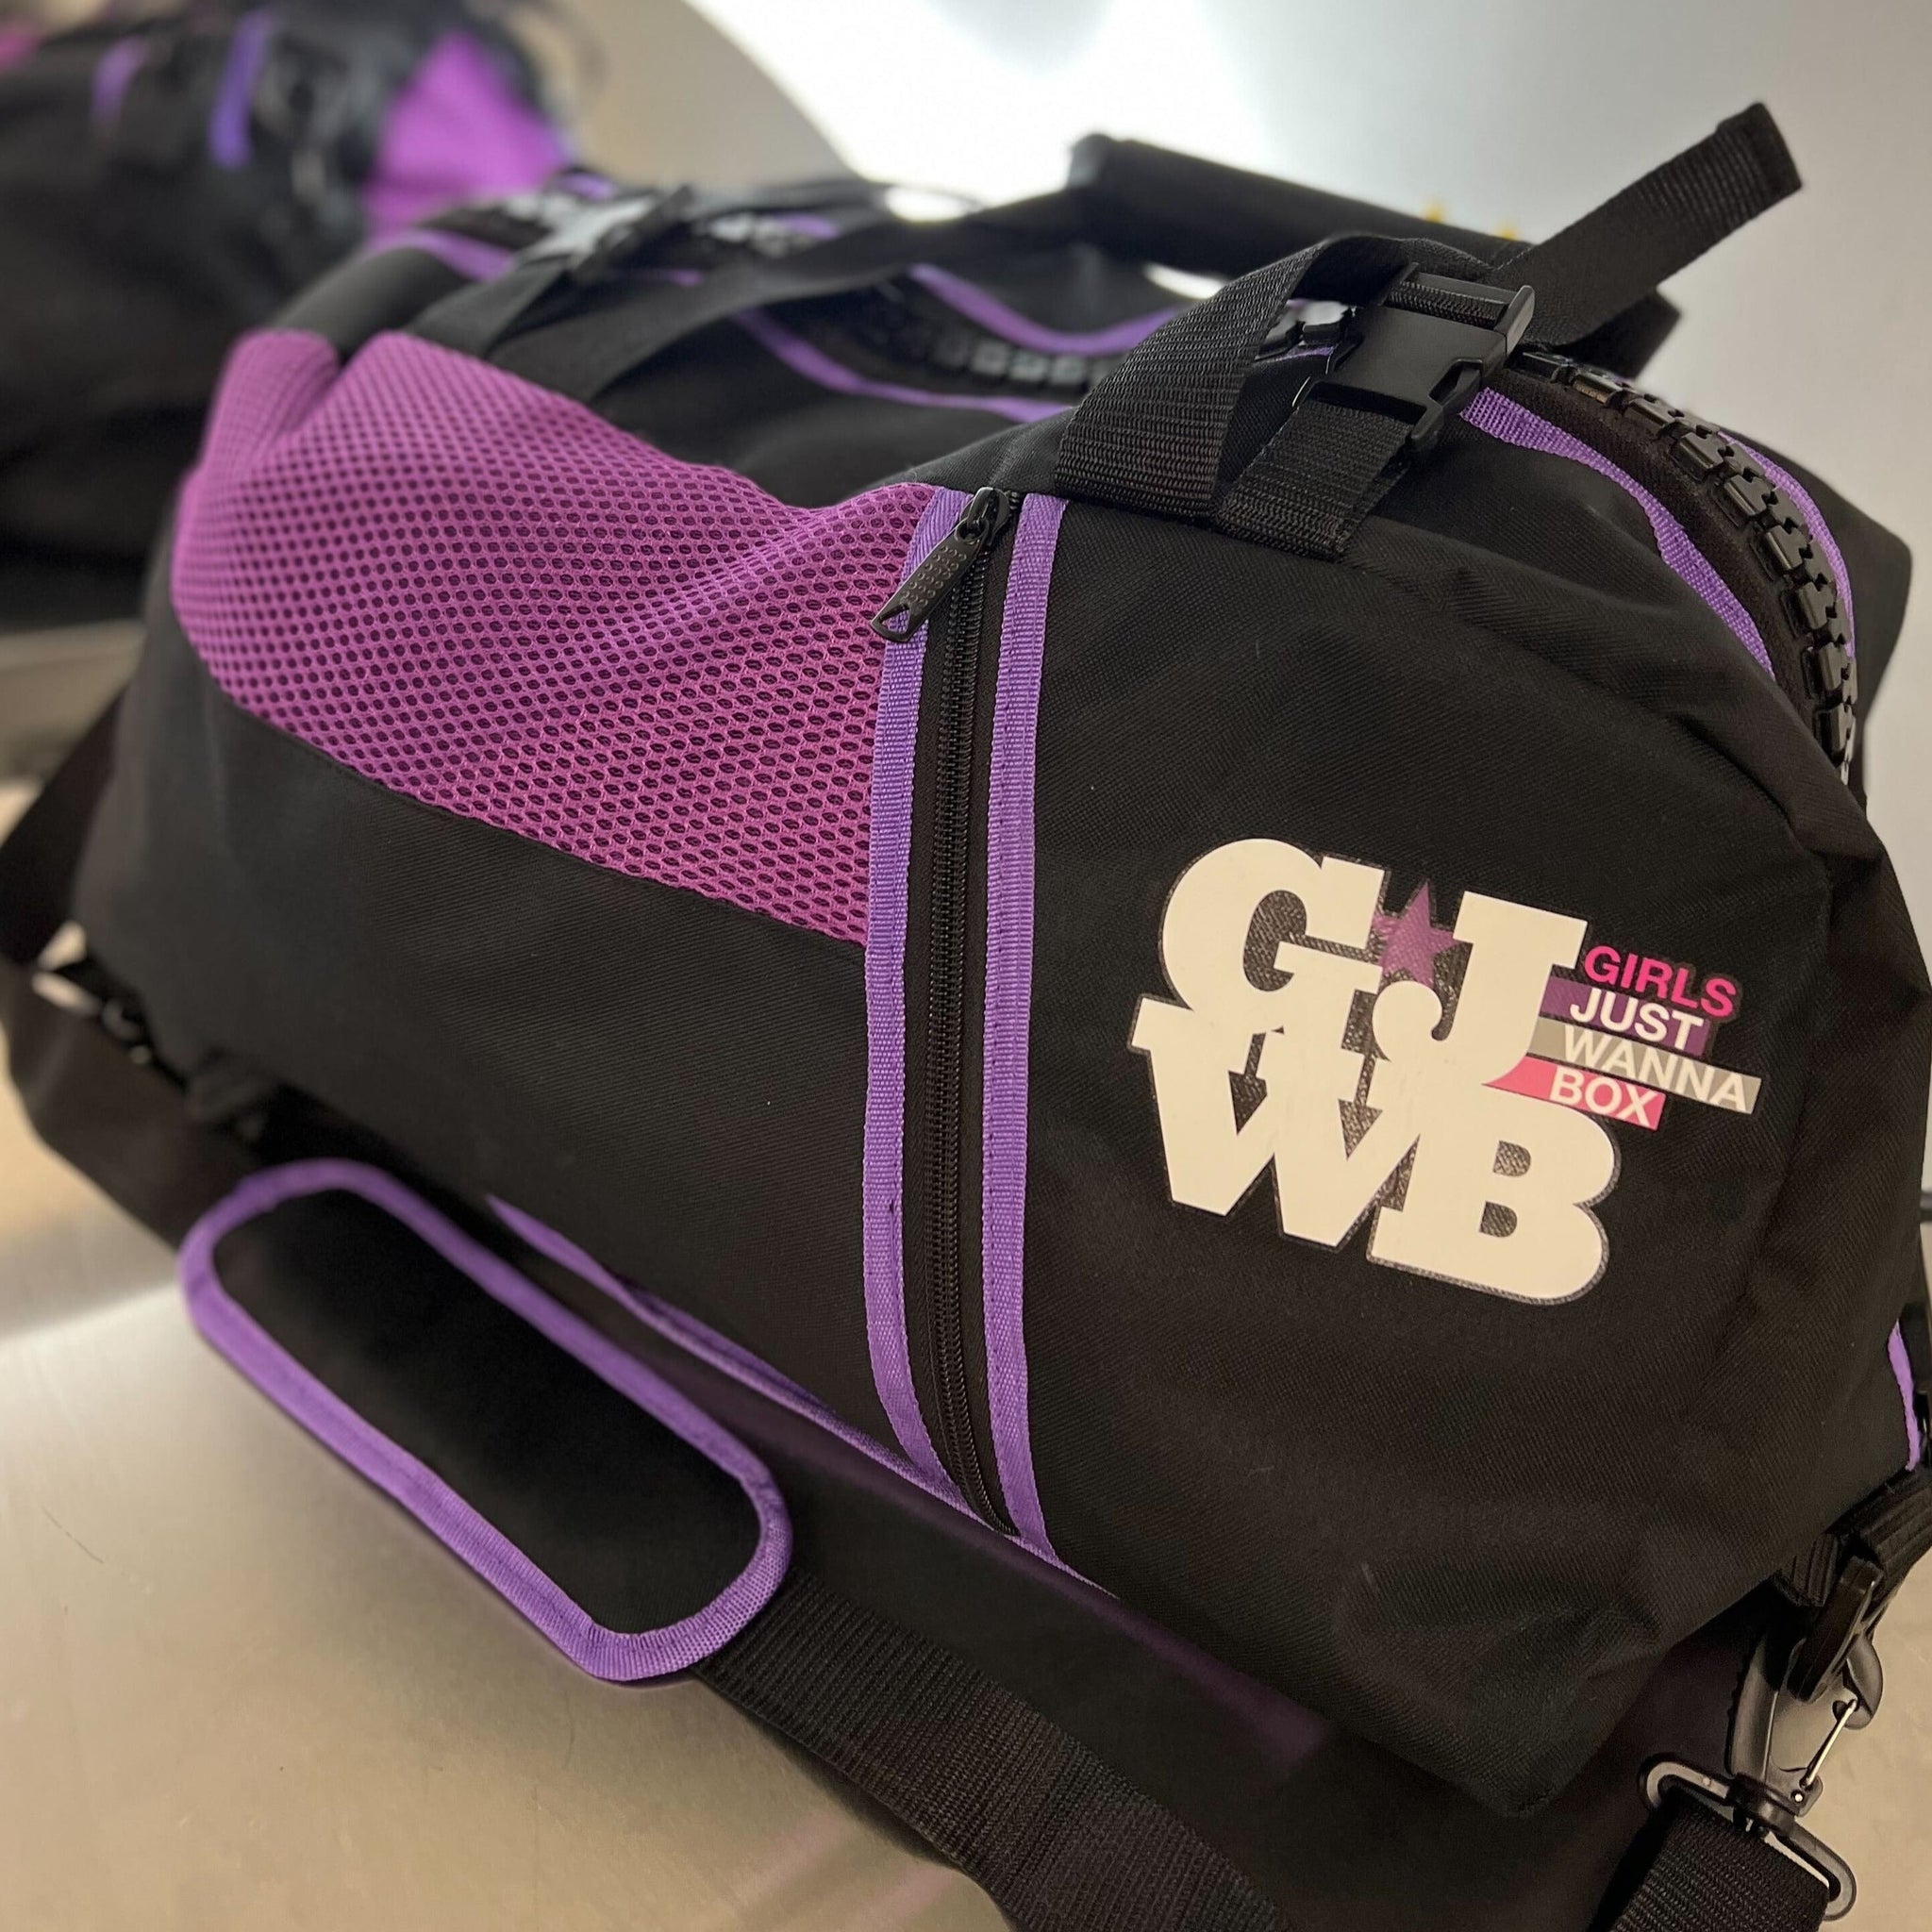 purple and black gym bag on a mirrored table